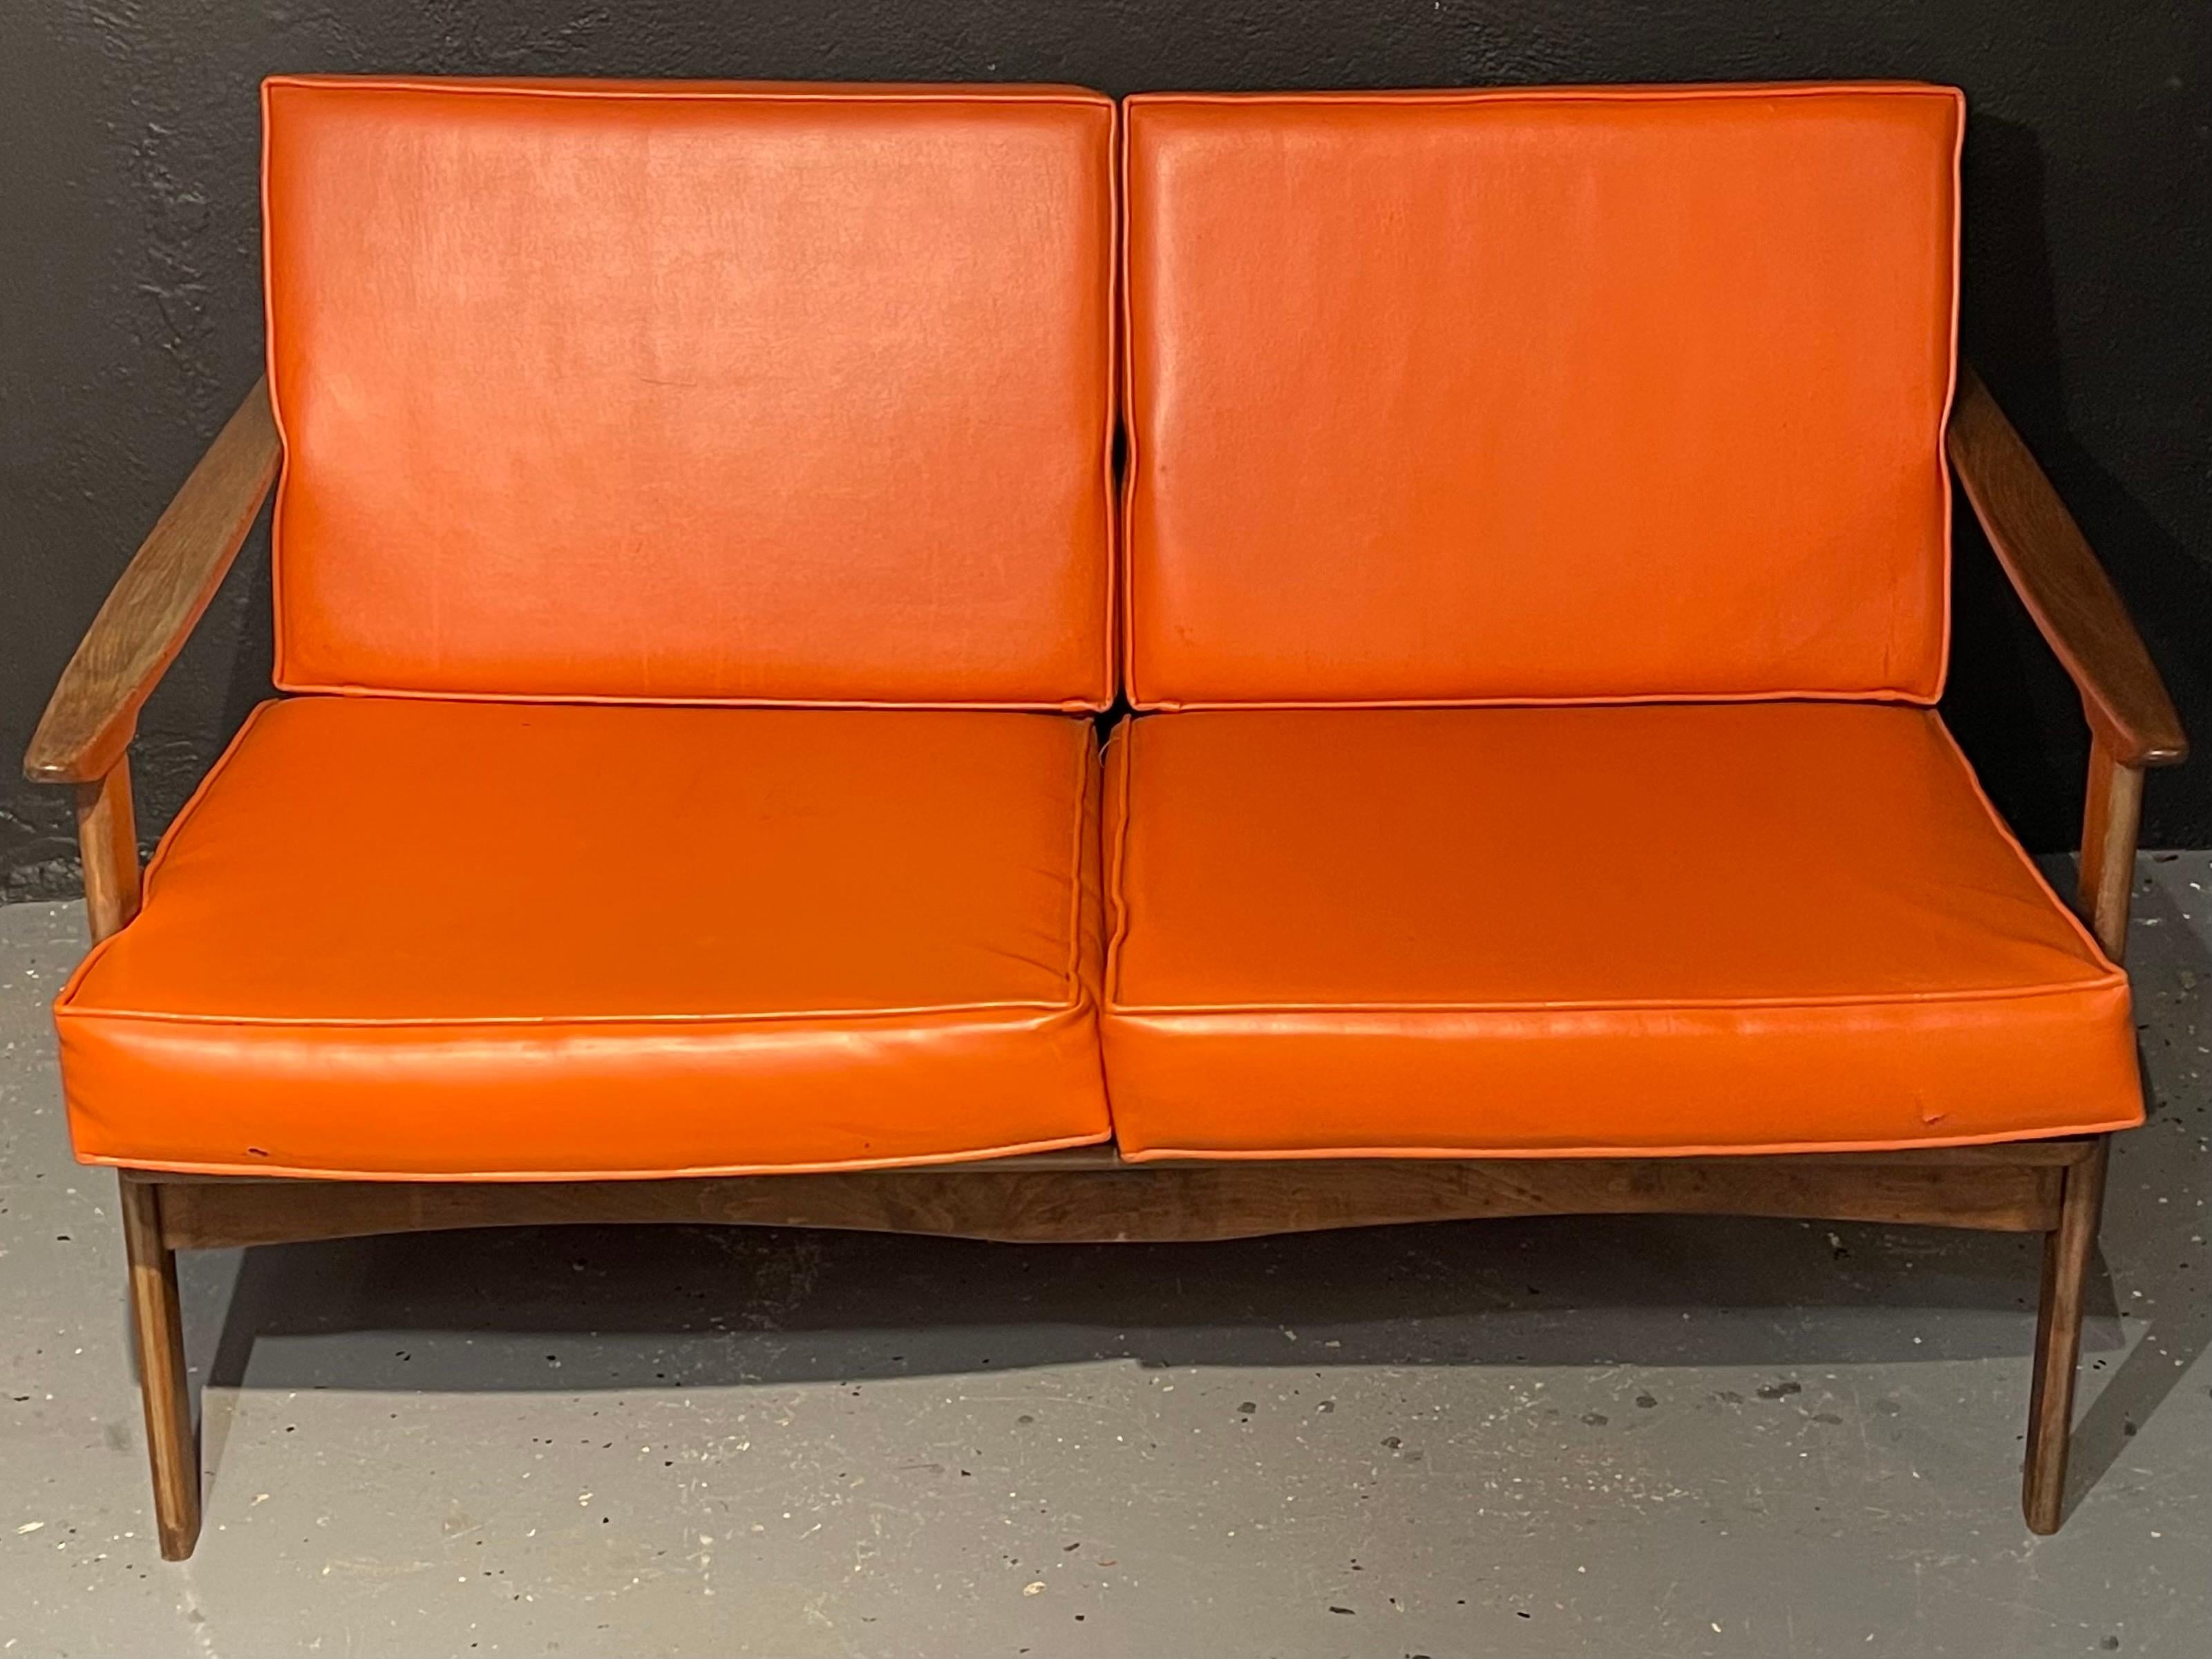 A Danish Mid-Century Modern settee having orange vinyl cushions in the manner of Ib Kofod-Larsen. All original. Slopping arms and sculpted skirt. The backrest of ladder form wooden slats with straps cushion seat rest supports. The whole of teak wood